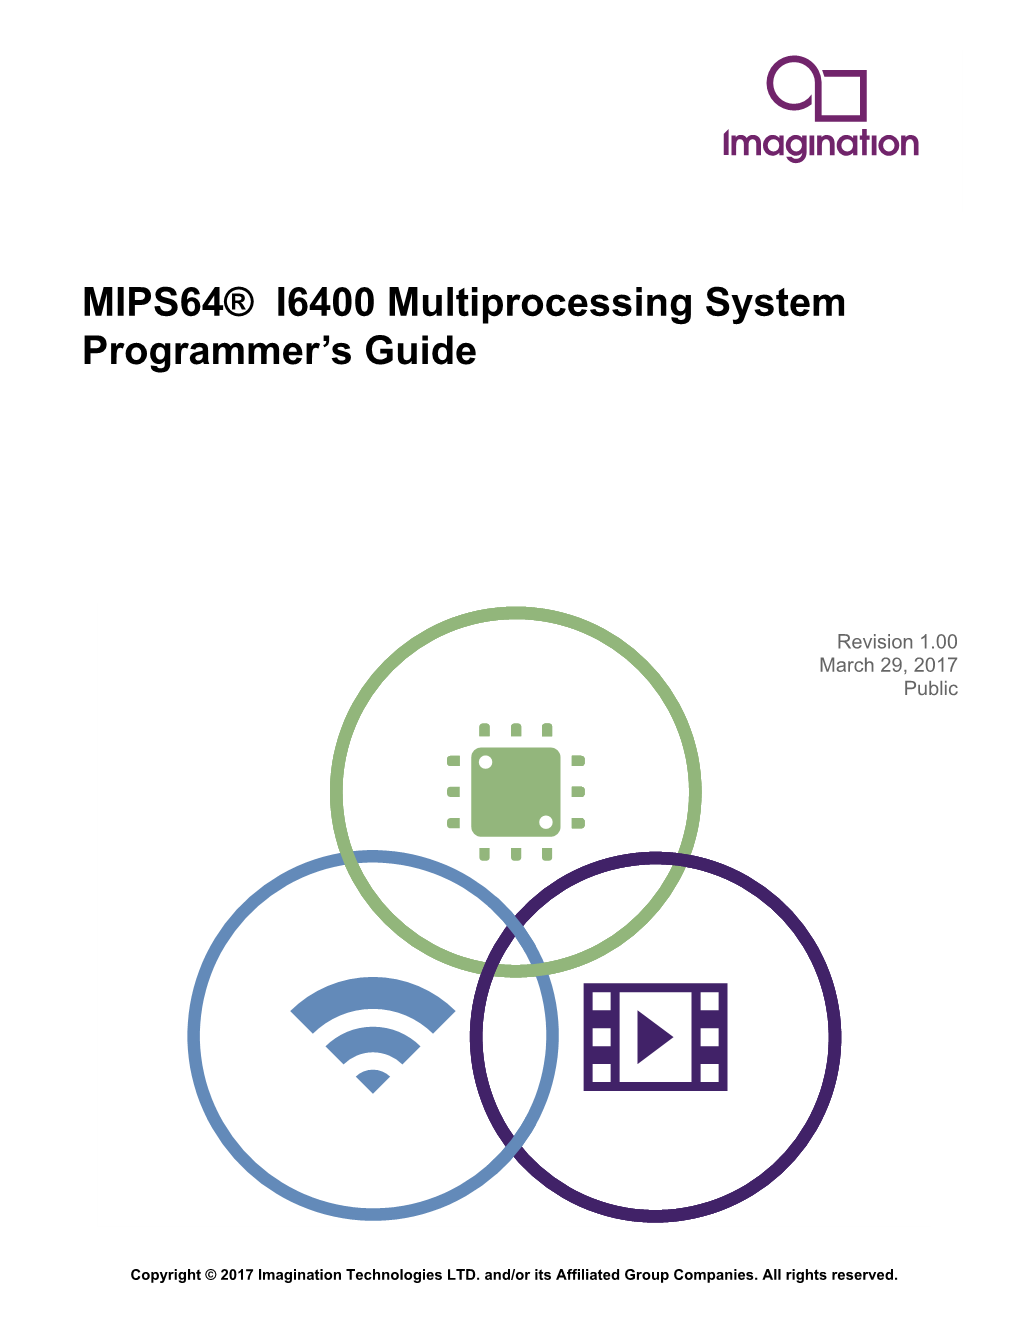 MIPS64® I6400 Multiprocessing System User Guide